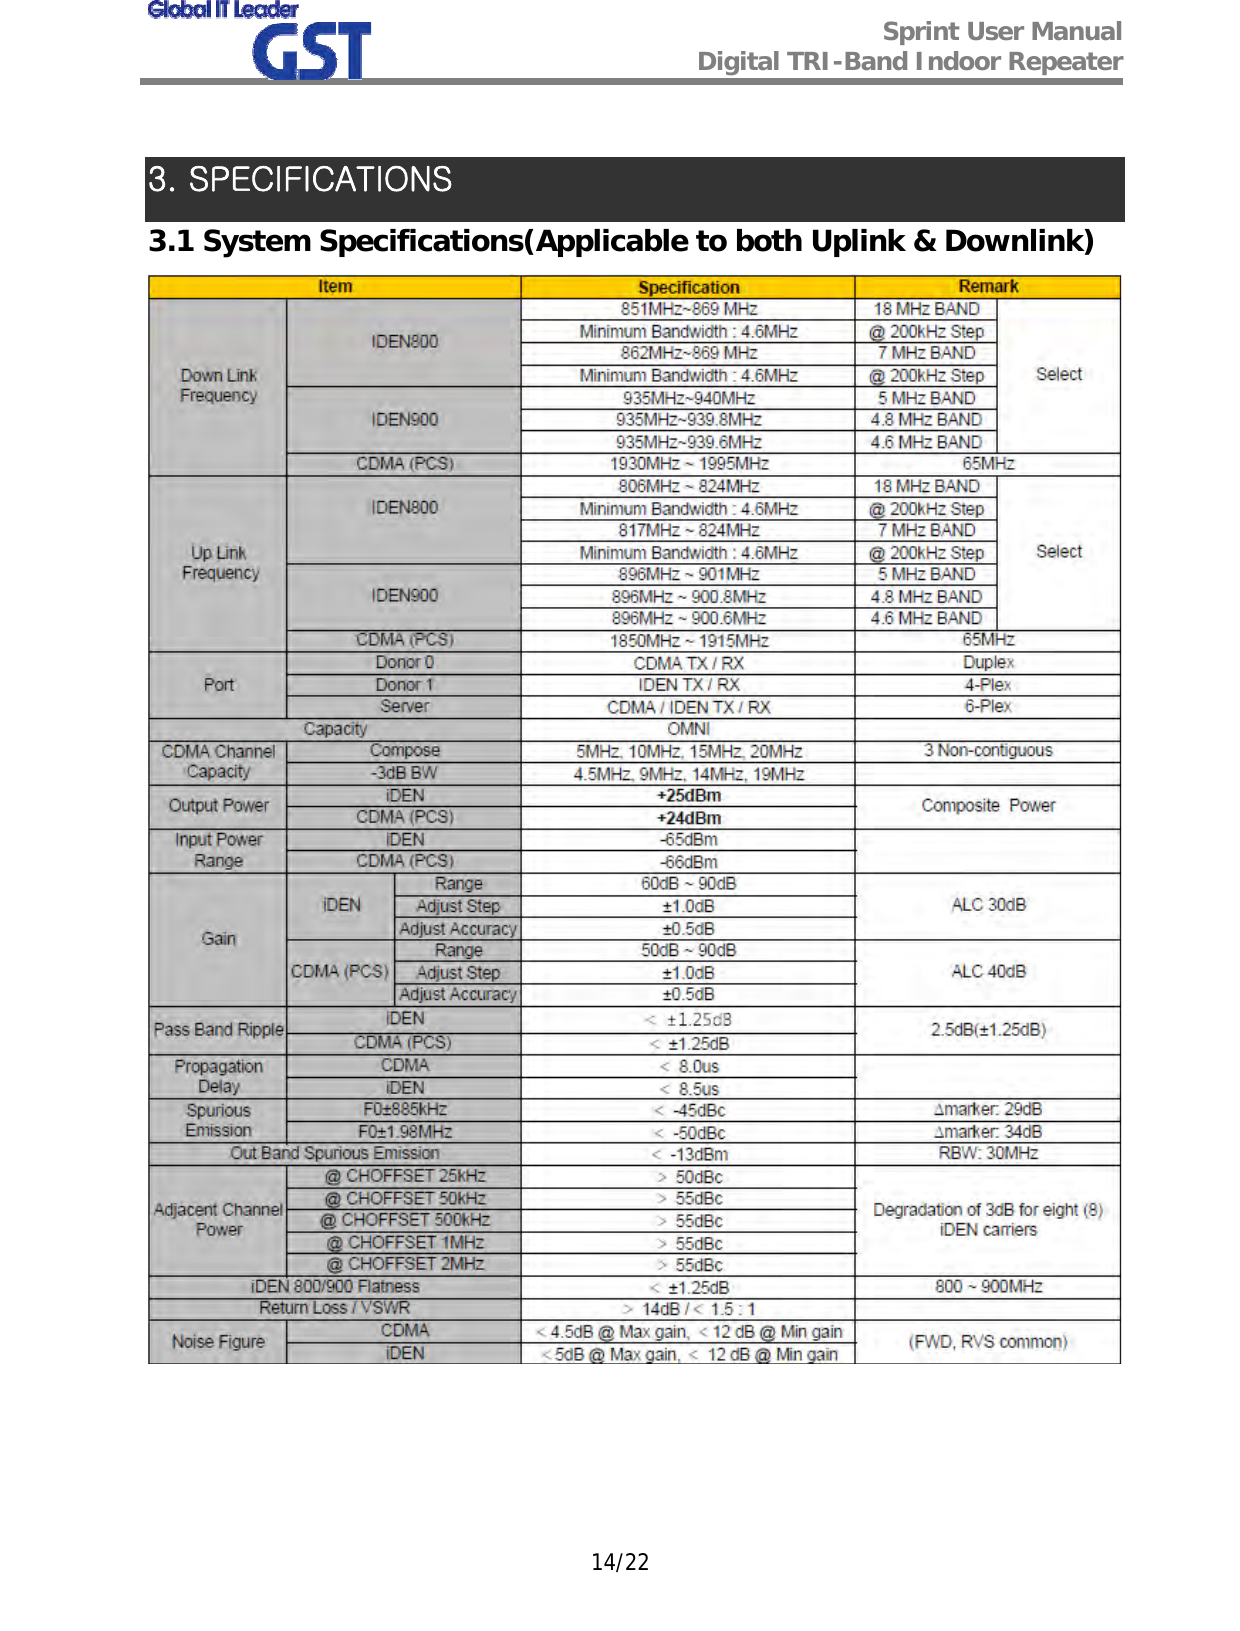  Sprint User Manual Digital TRI-Band Indoor Repeater   14/22  3. SPECIFICATIONS 3.1 System Specifications(Applicable to both Uplink &amp; Downlink)  